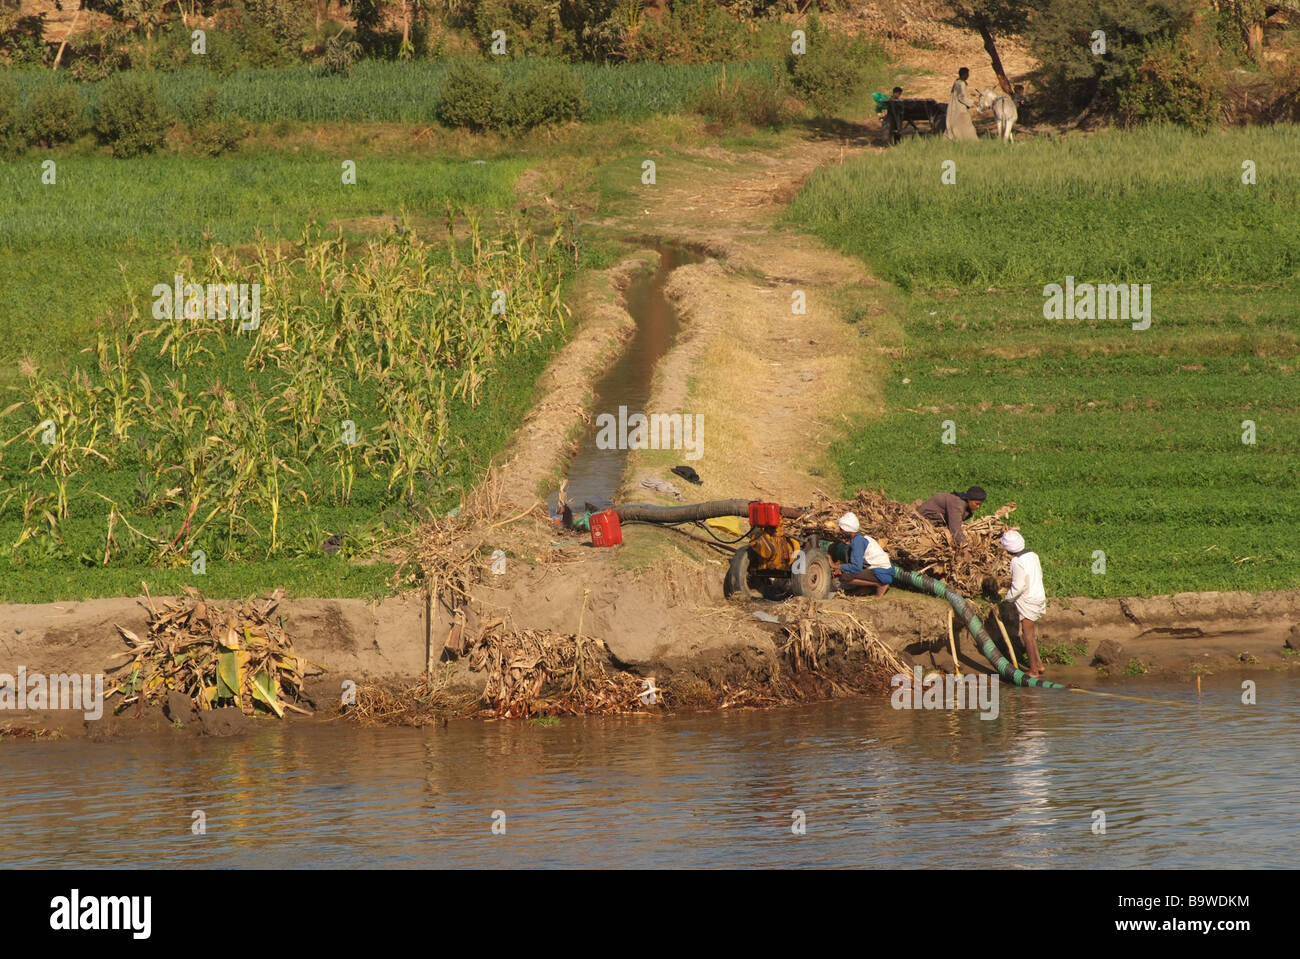 Egypt_Nile_River_An_irrigation_system_pu